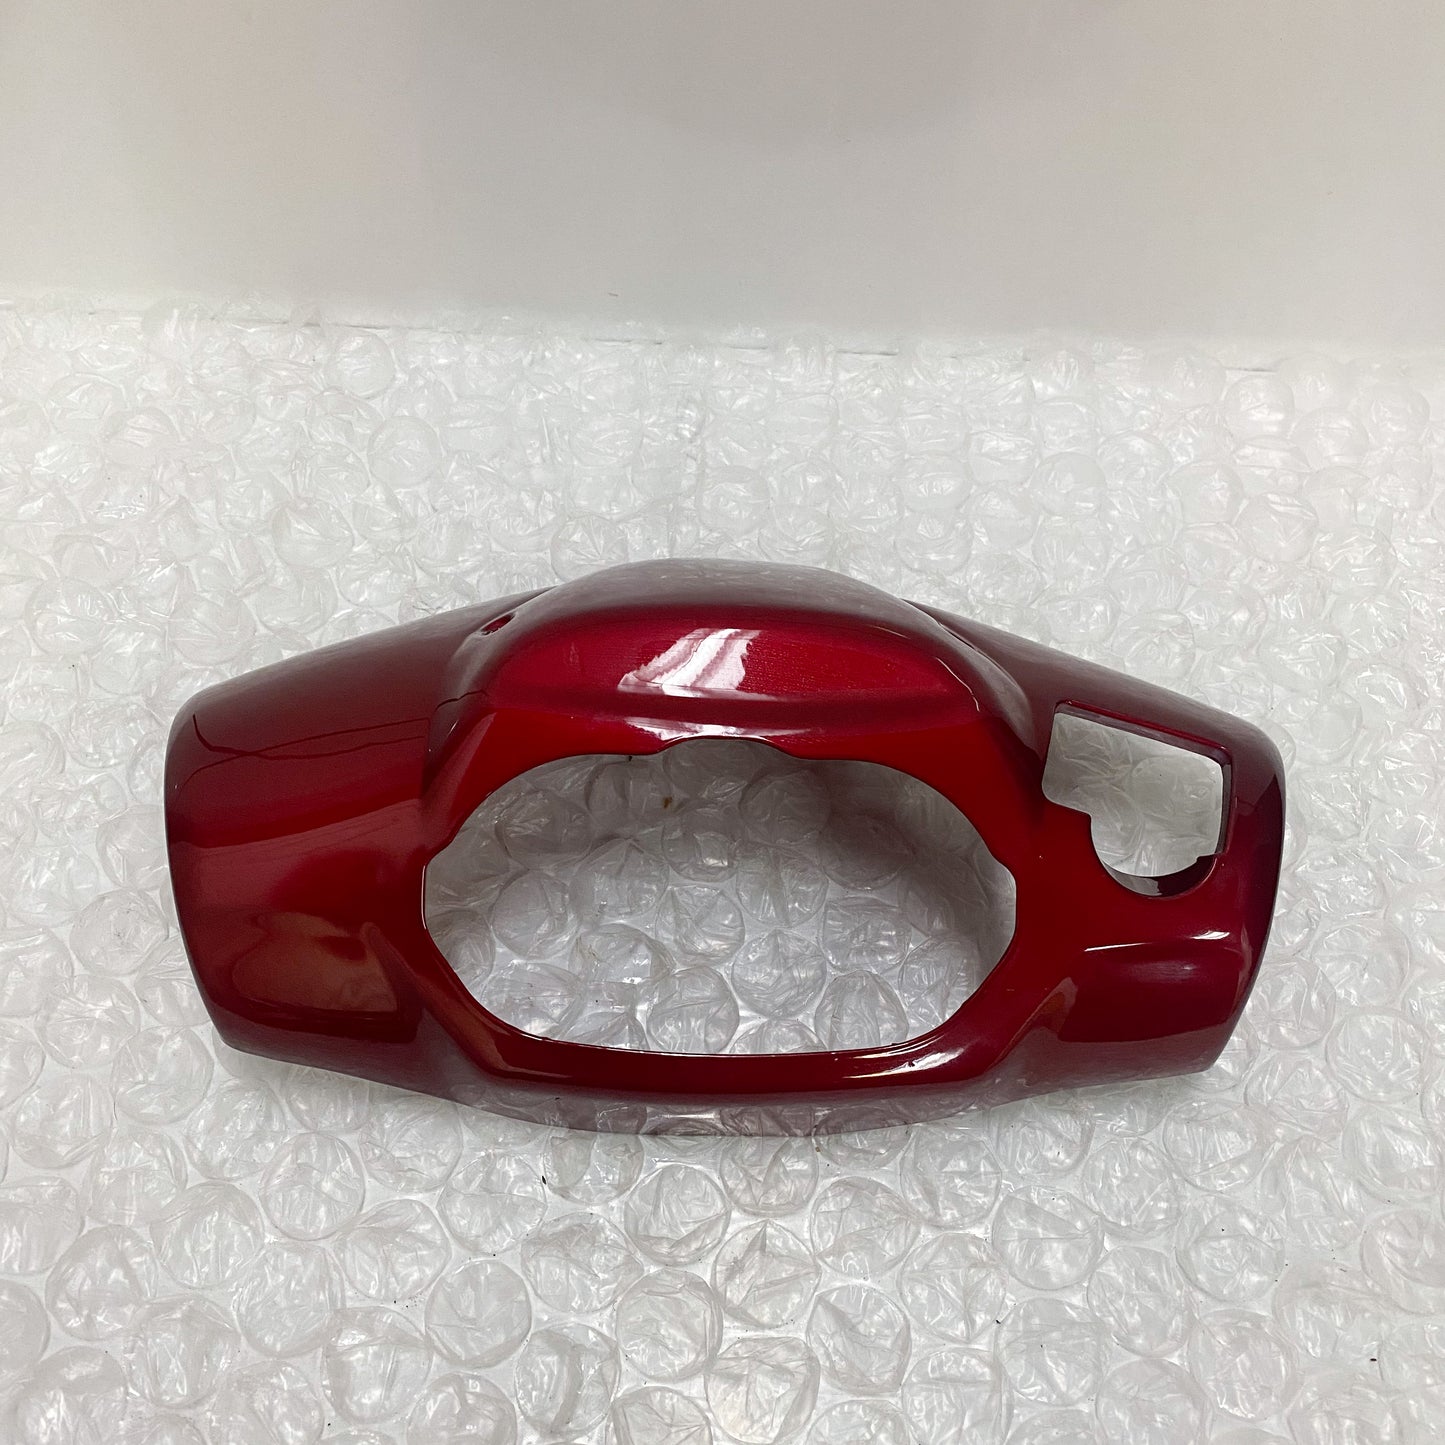 Vento ZIP R3i Red Handle Cover, Up 65201BMBTRS0 NOS